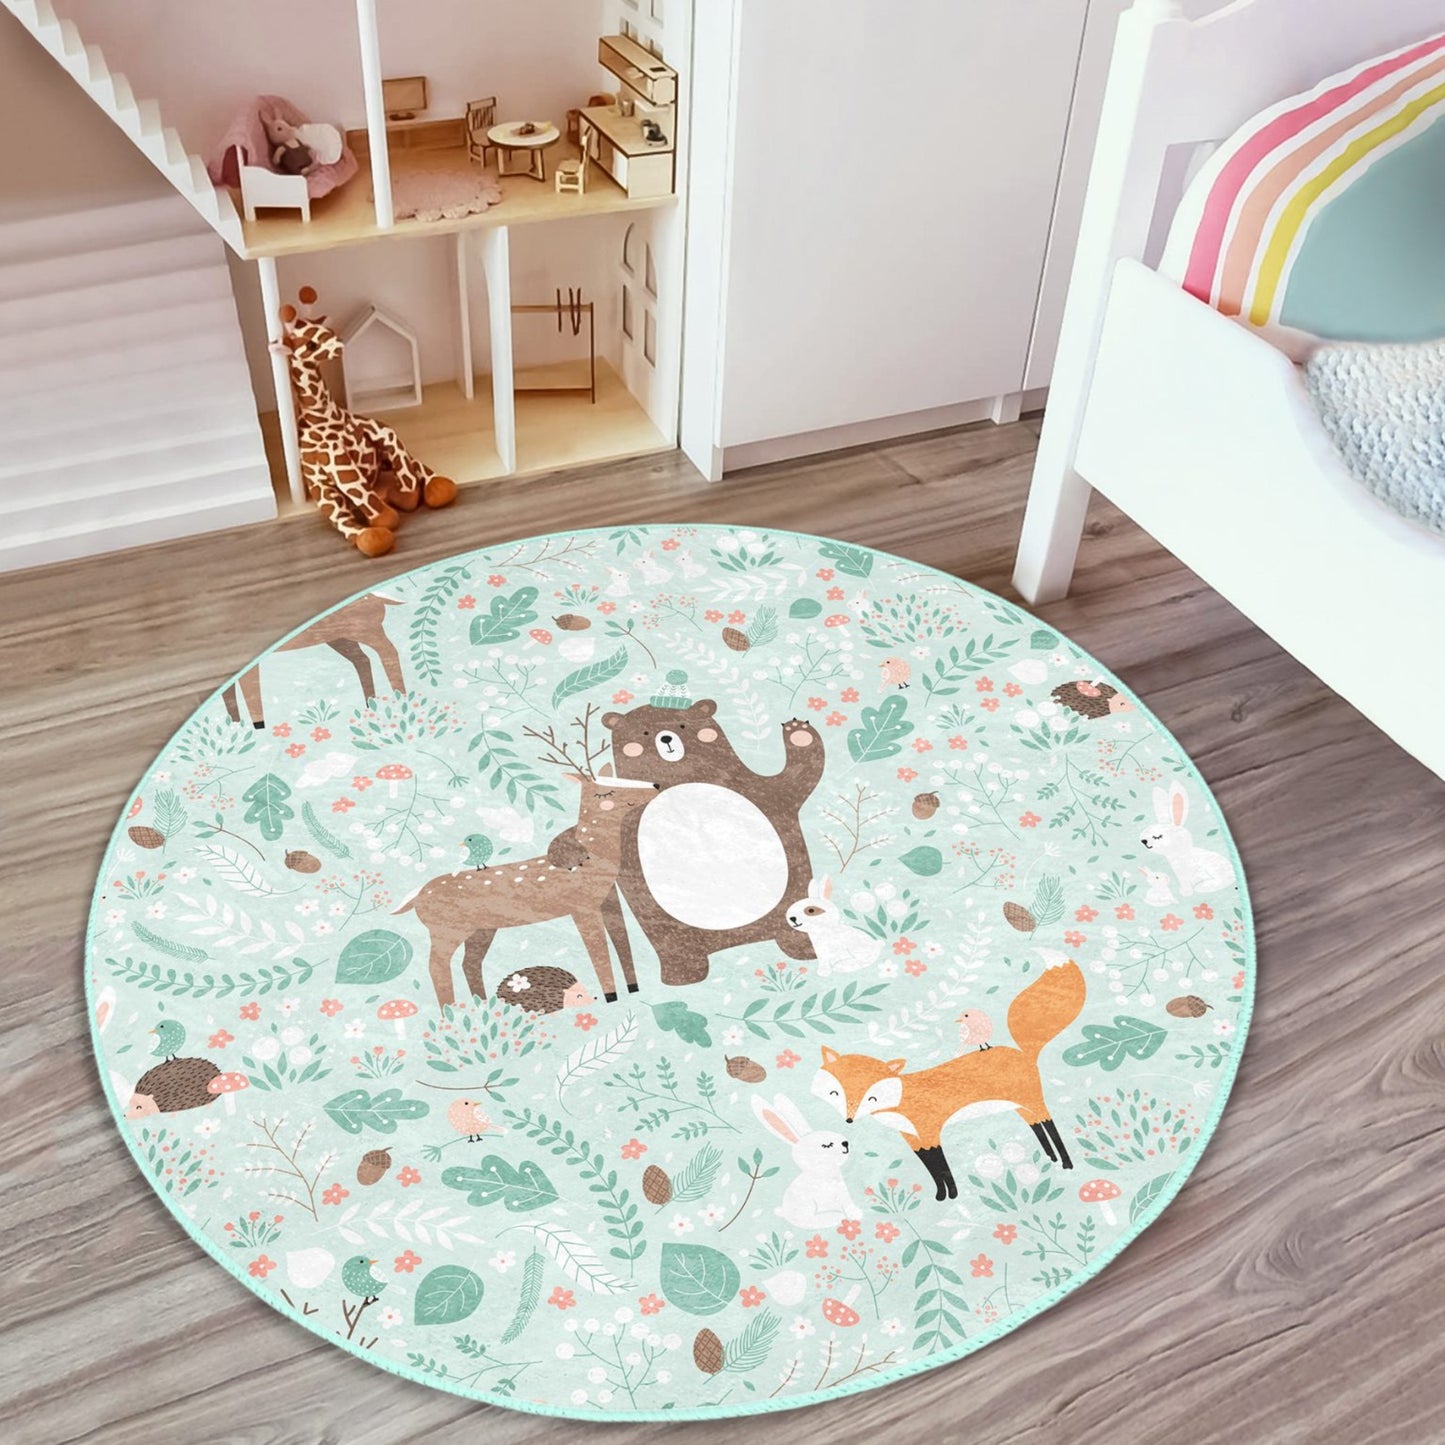 Round Animal Patterned Floor Rug - Whimsical Charm